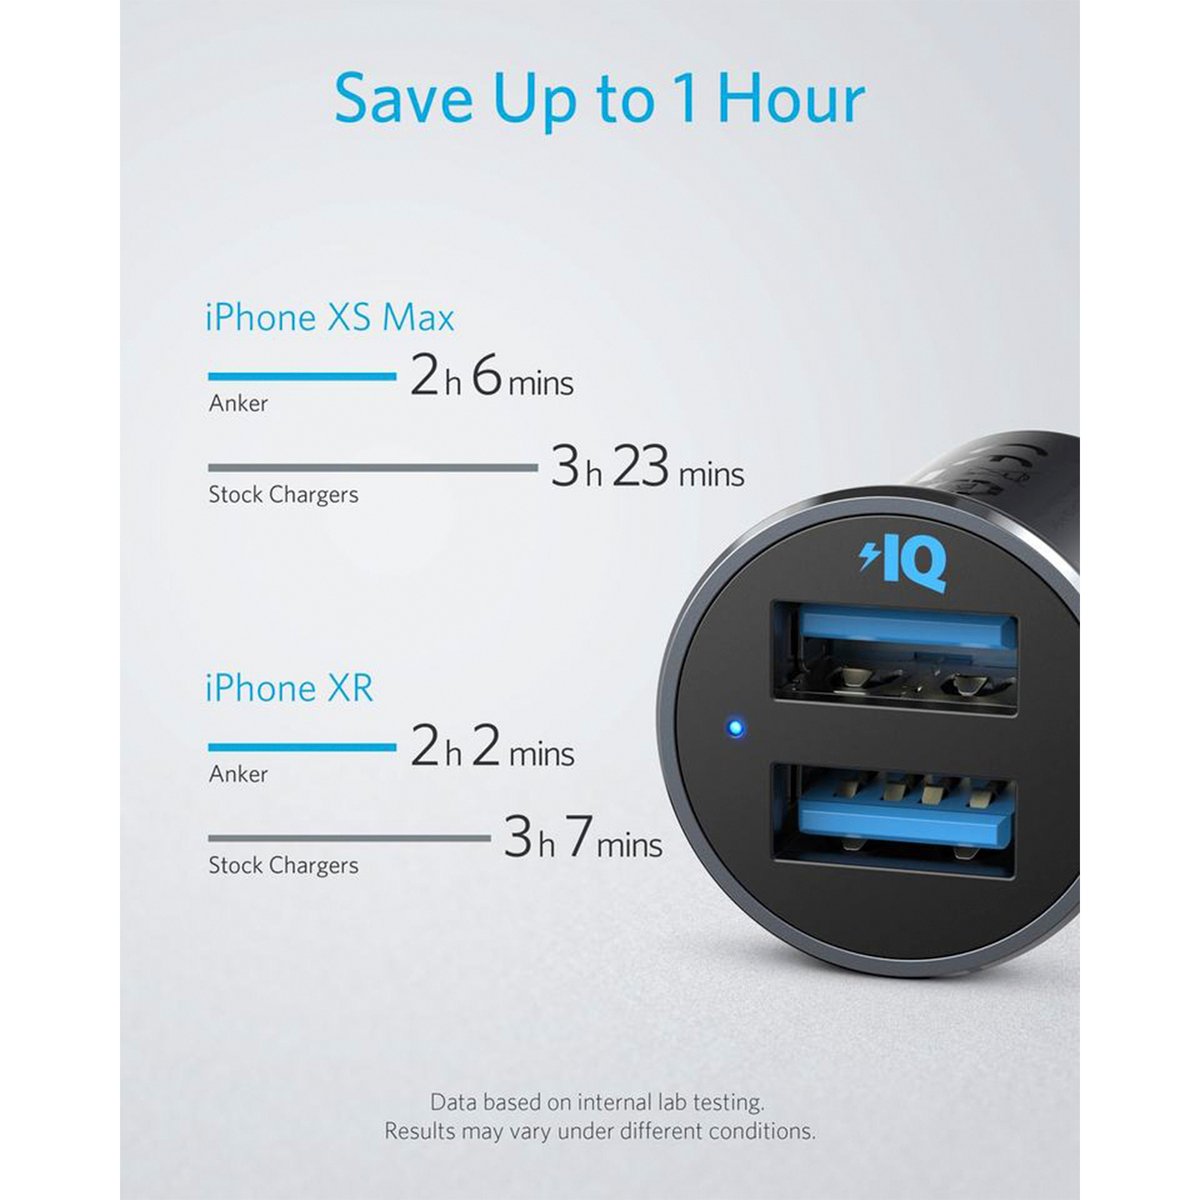 Anker PowerDrive 2 Alloy 24W Car Charger with 2 Ports with some features